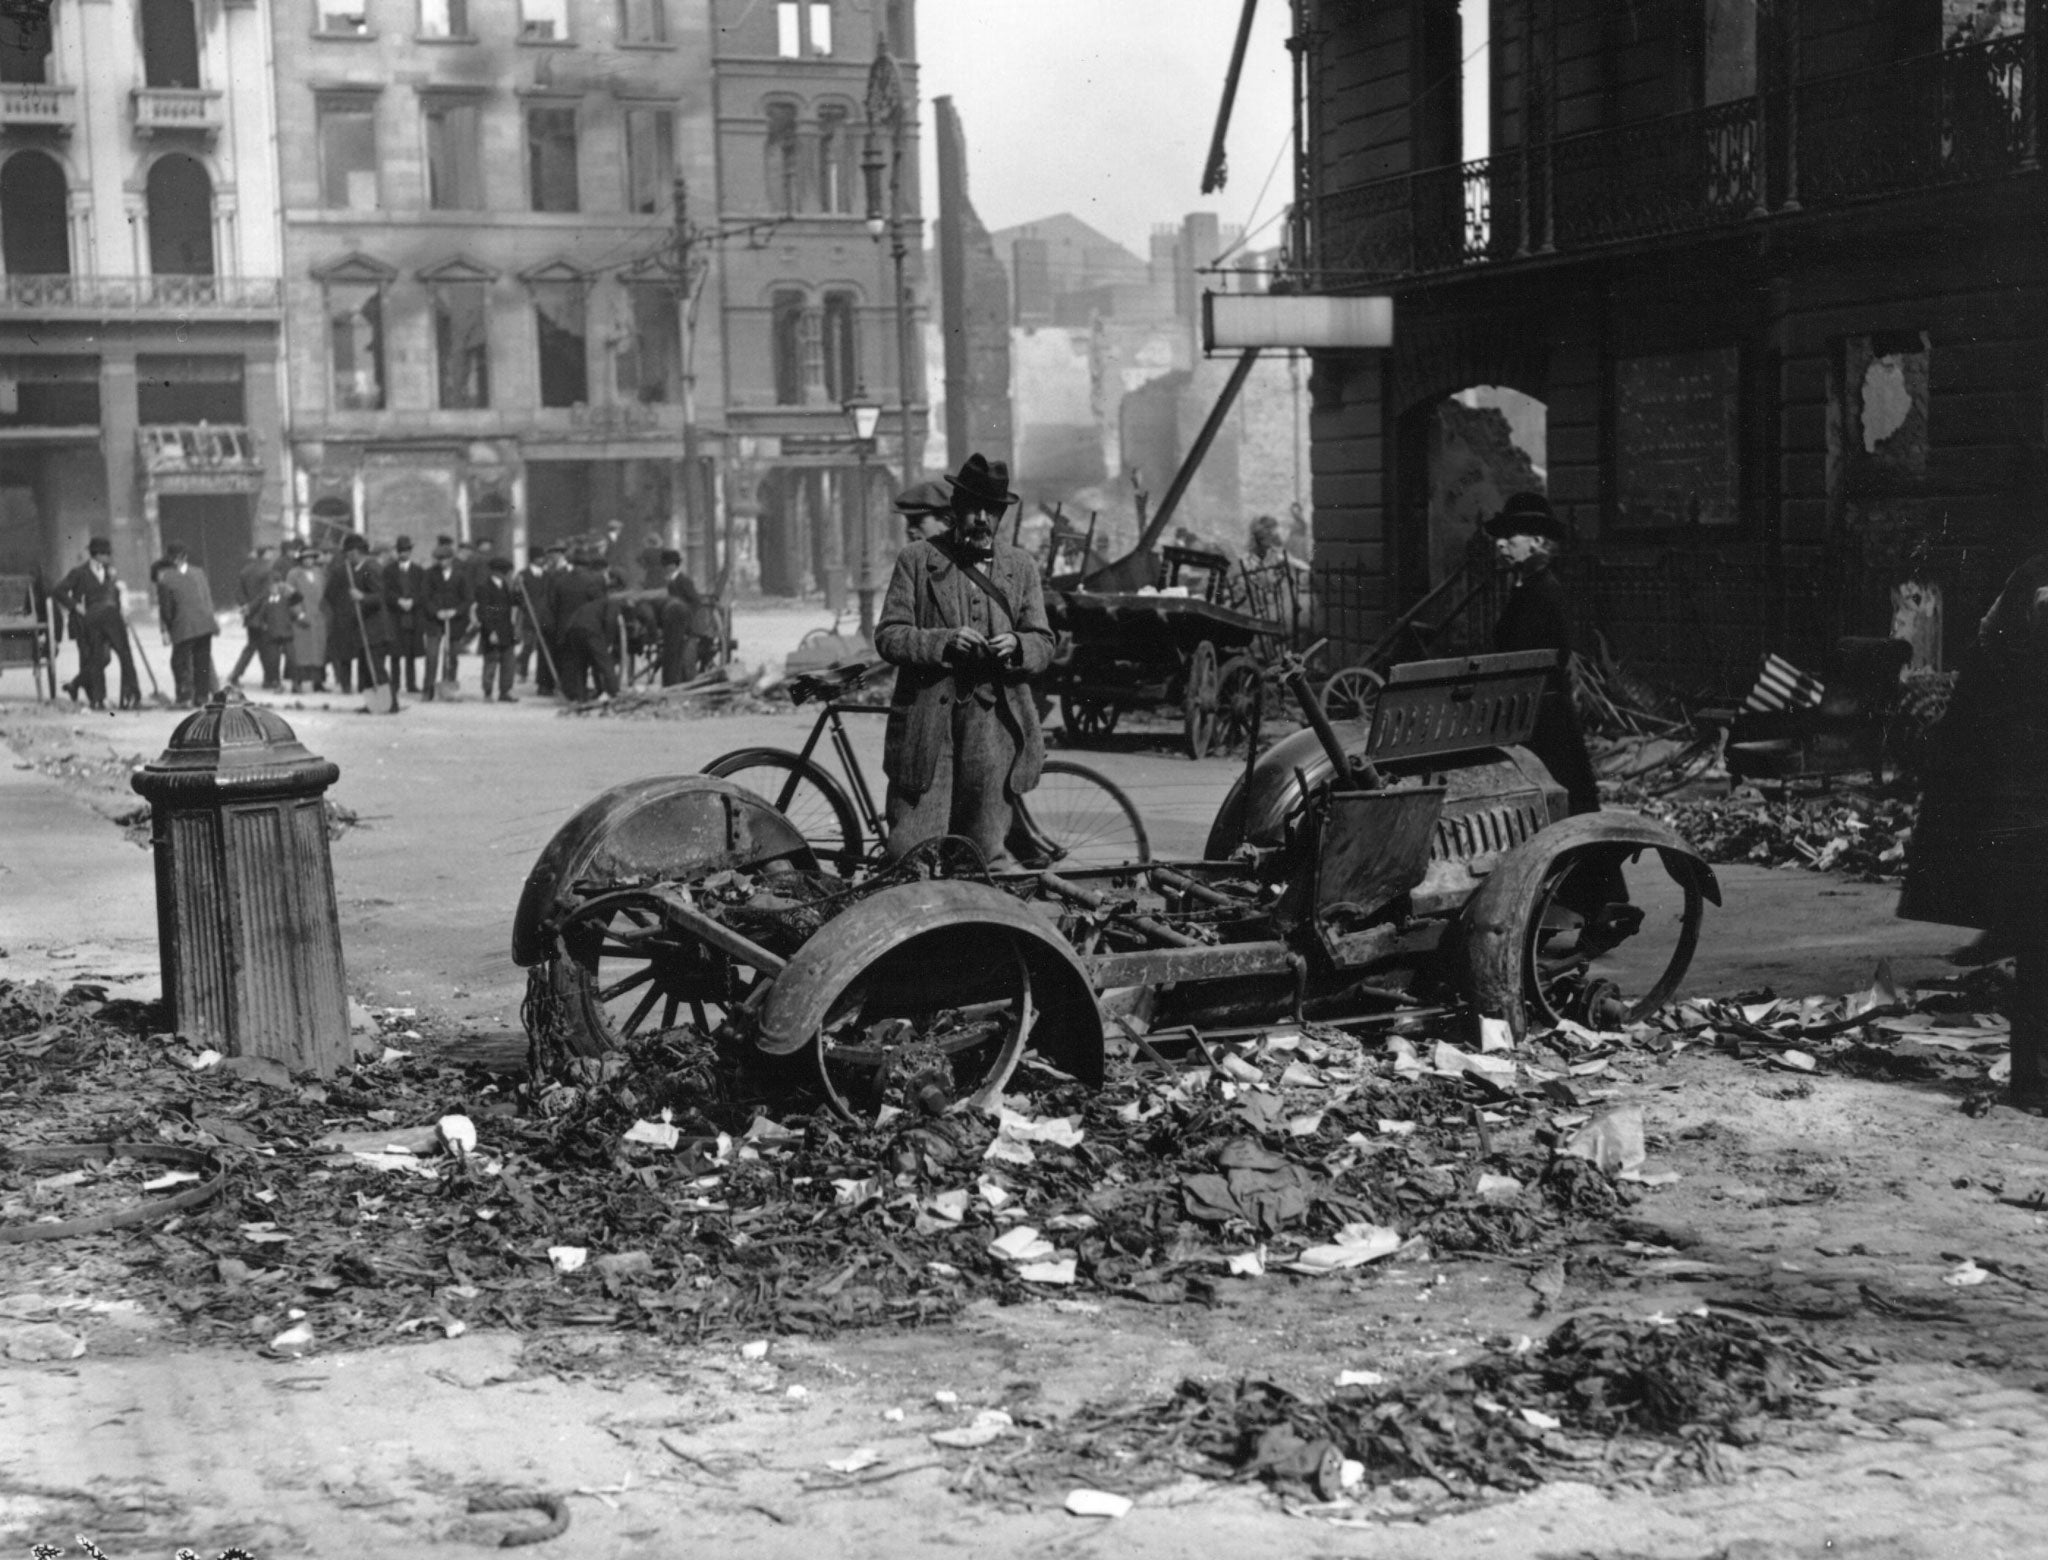 The aftermath of the Easter uprising with the ruins of a car in the foreground which has been used as a barricade